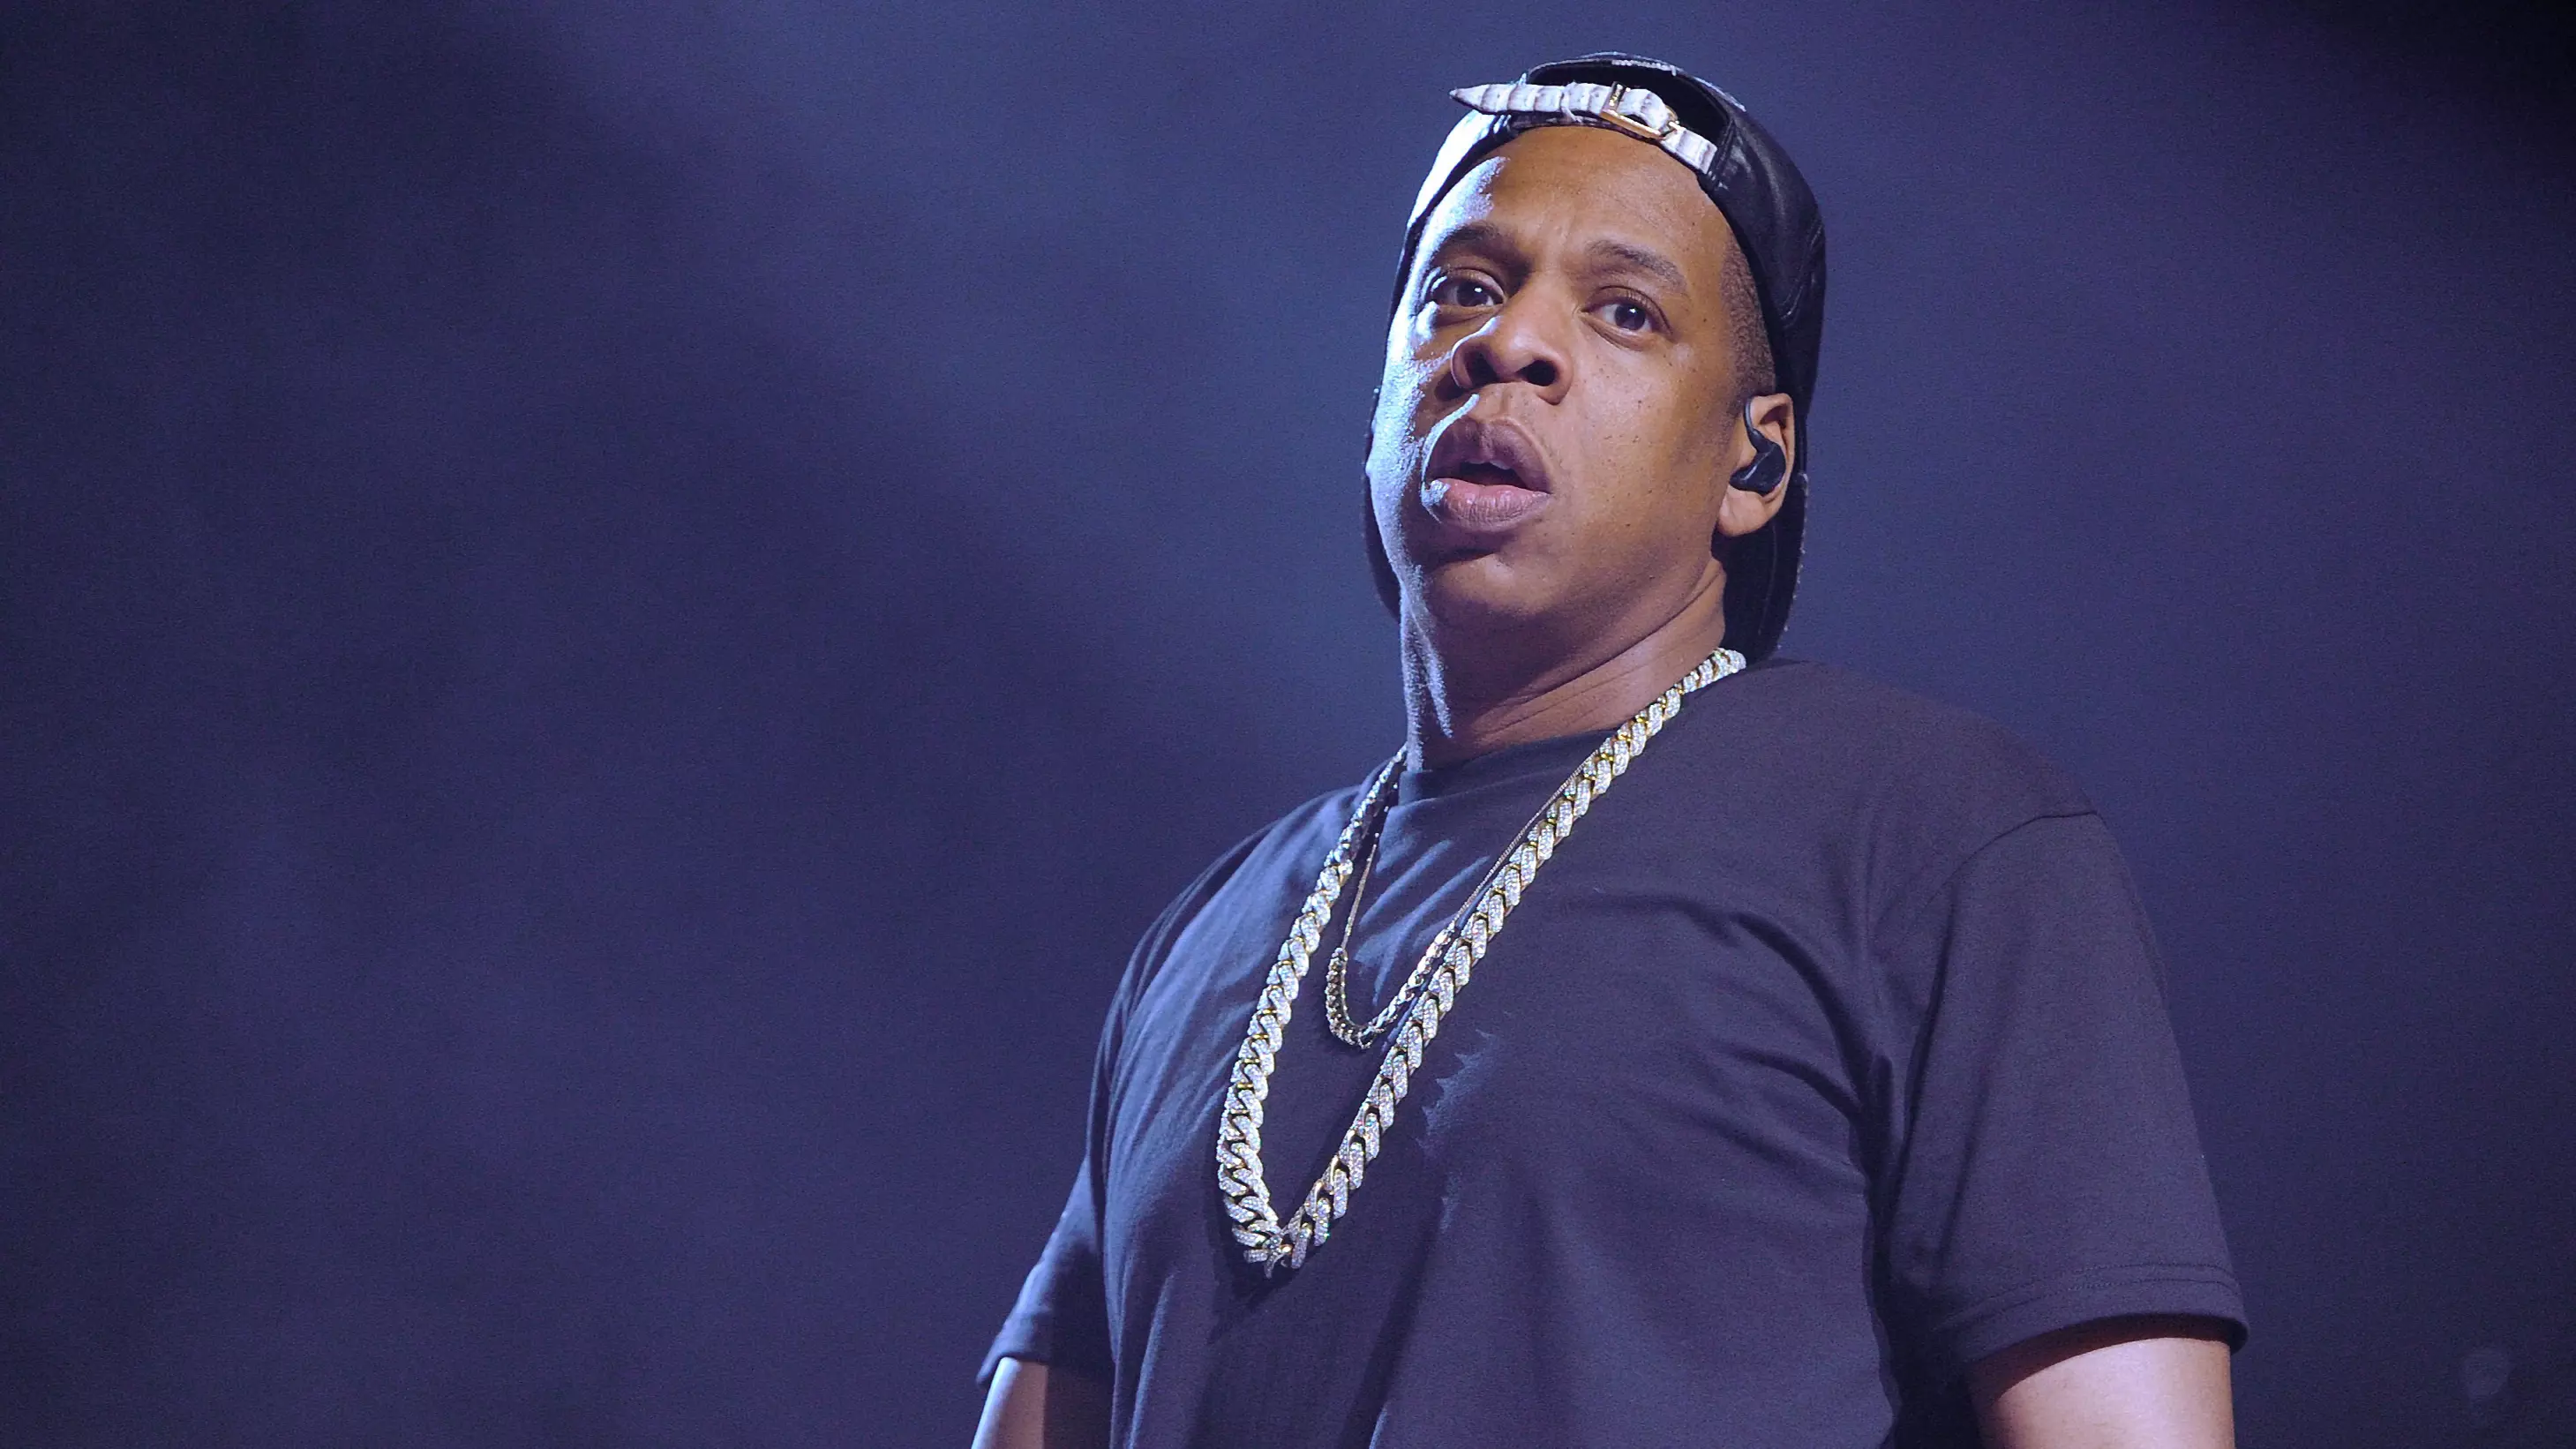 Jay-Z Joins Legal Cannabis Company Caliva As Chief Brand Strategist 